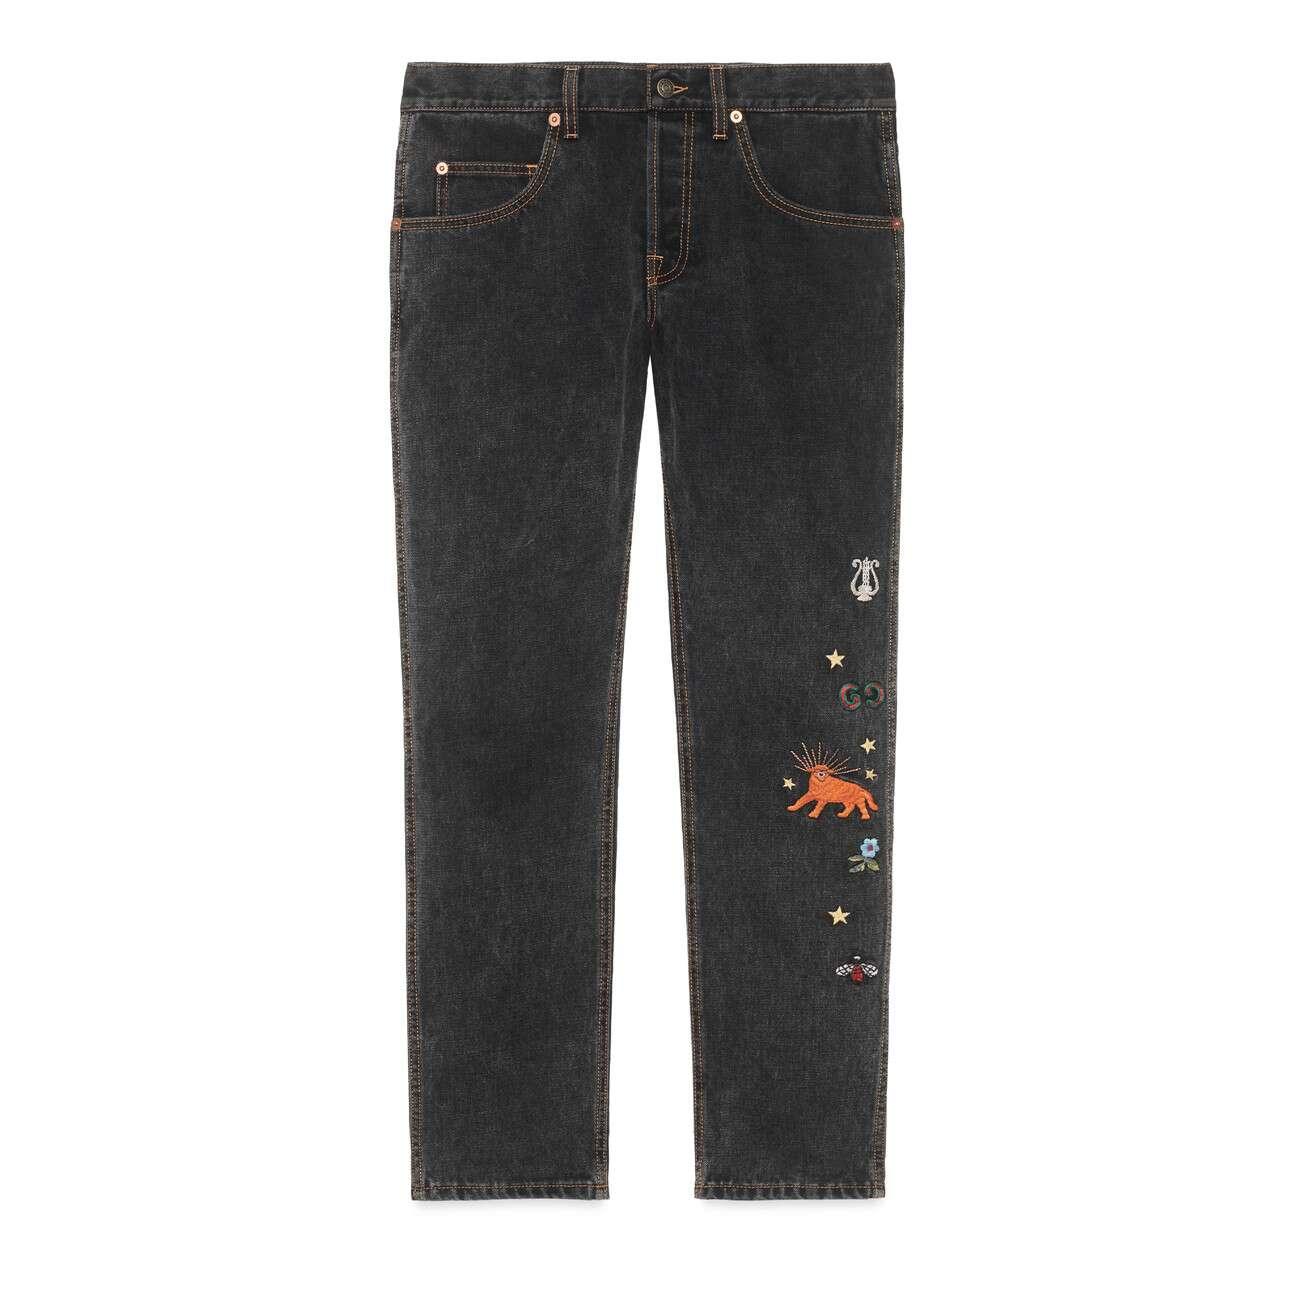 Gucci Embroidered Tapered Denim Pant in Black for Men - Lyst